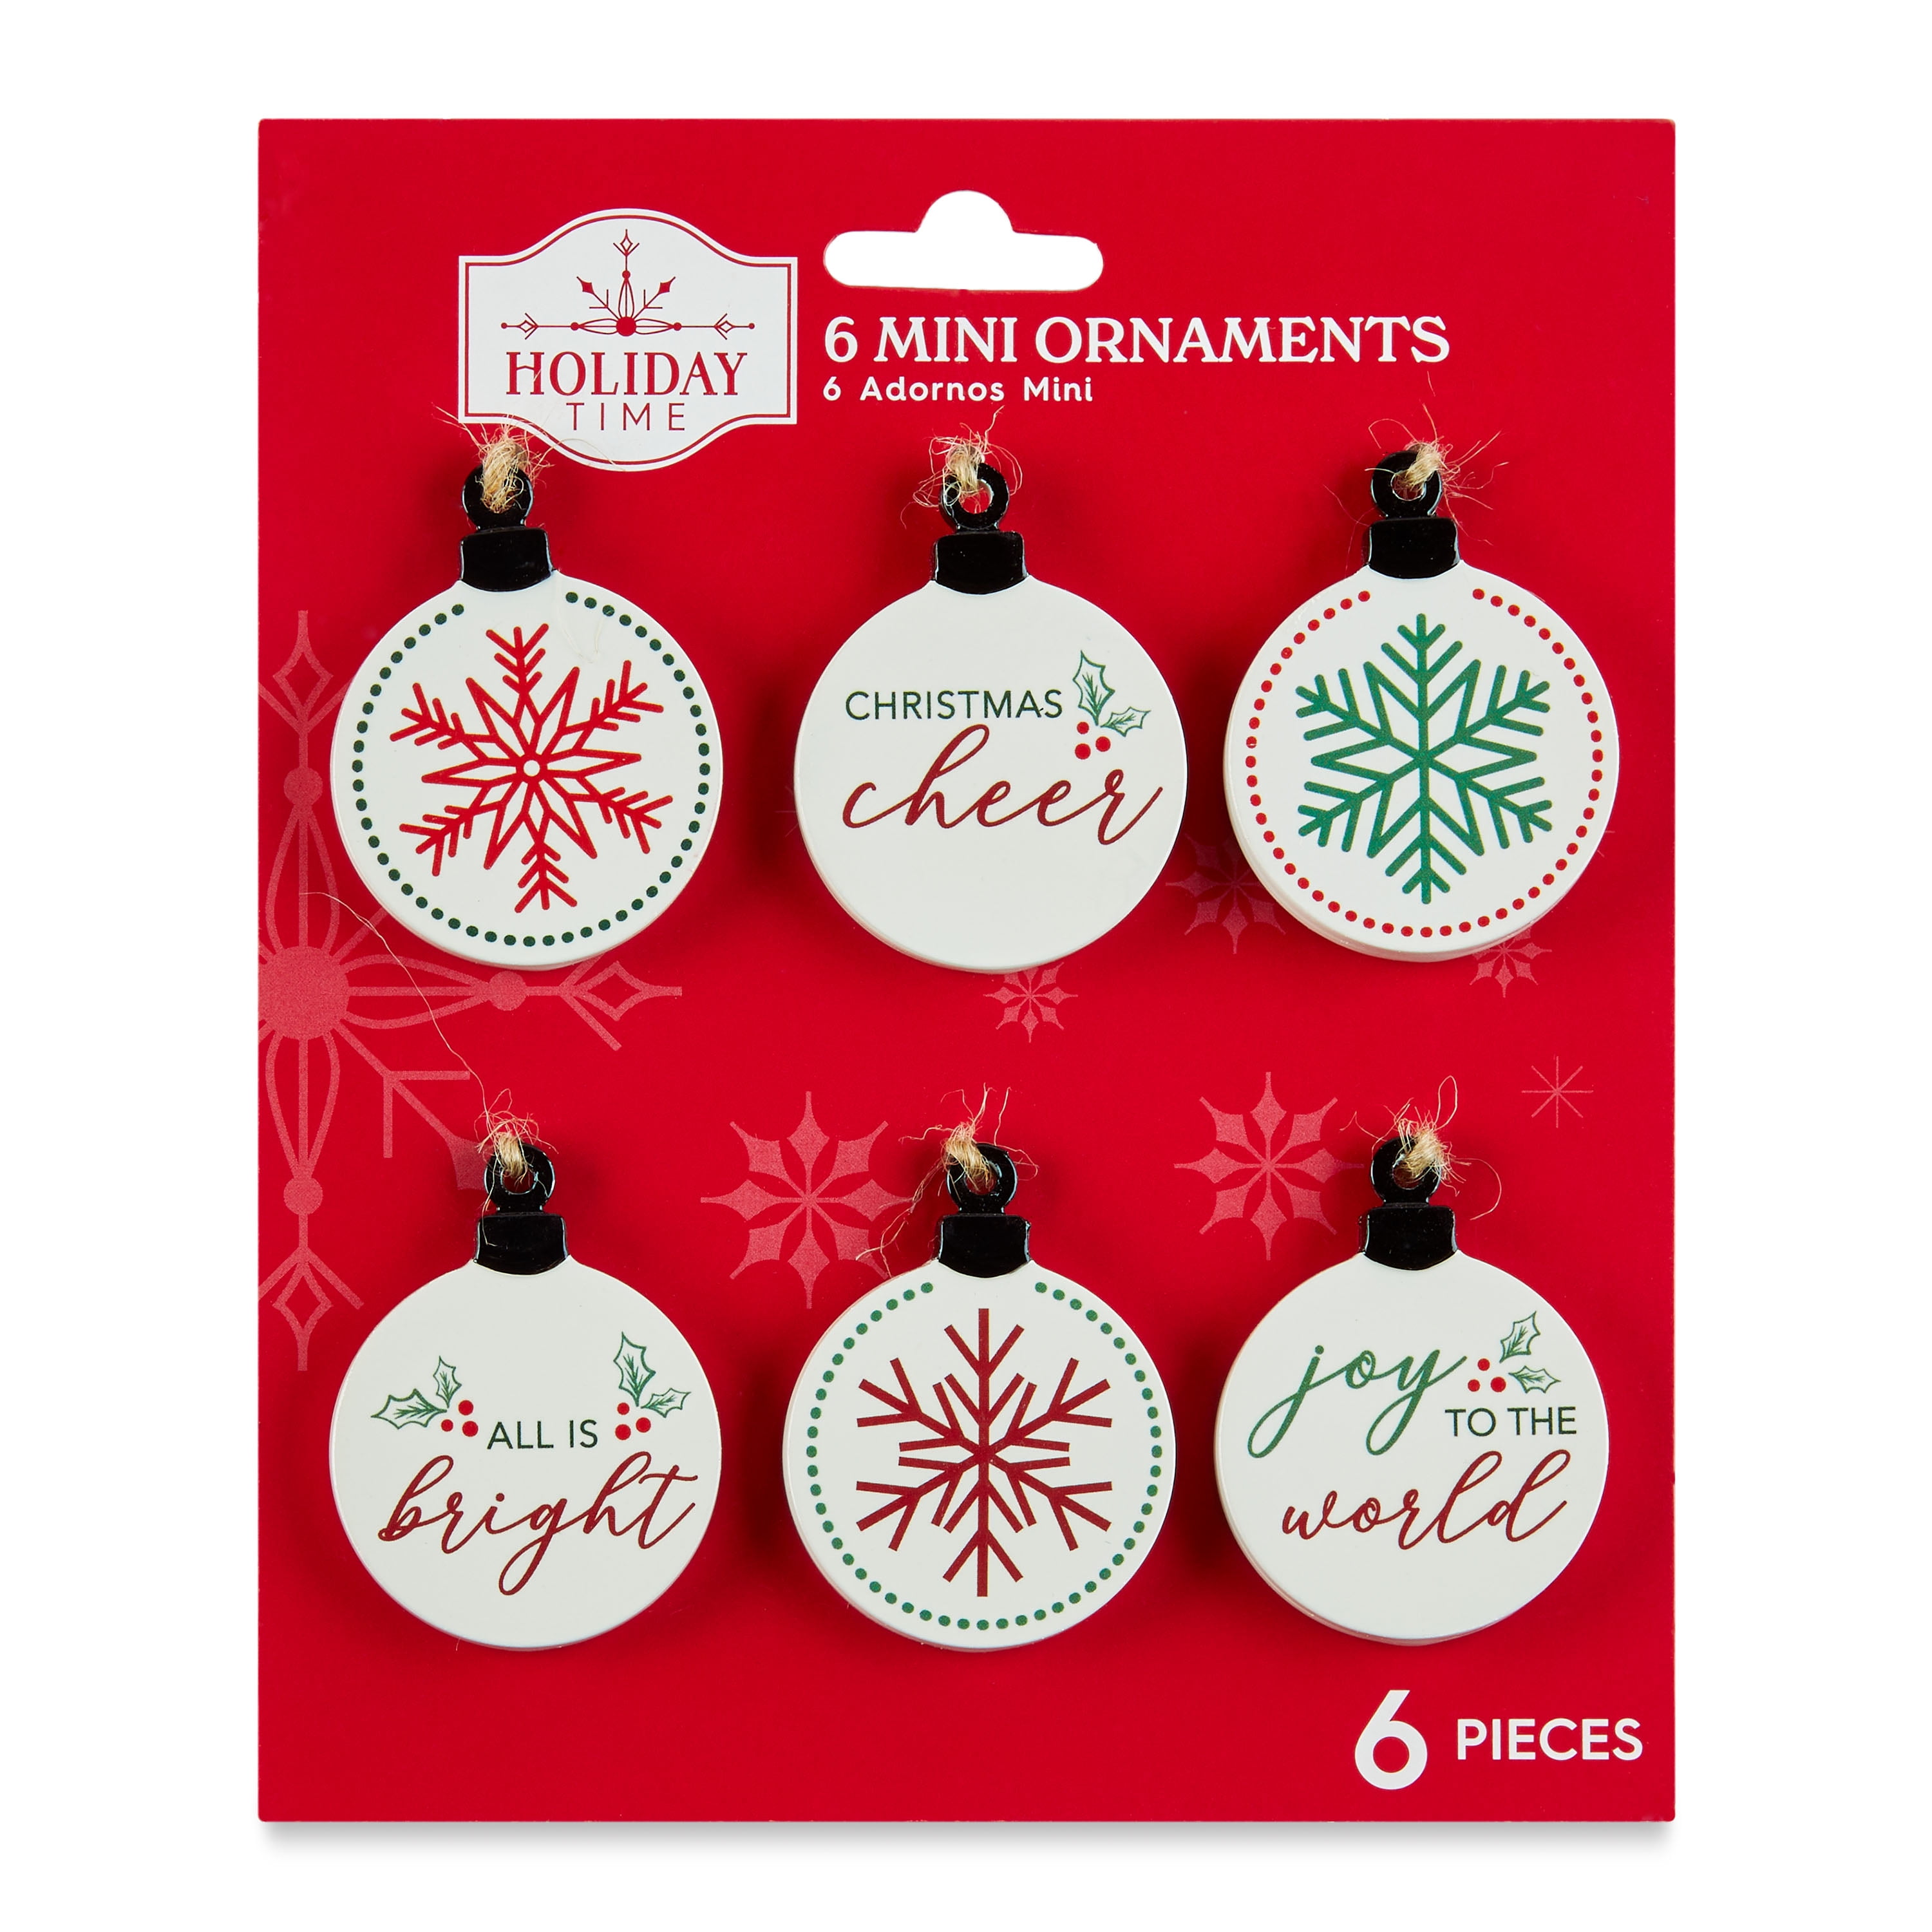 Holiday Time Christmas Tree Mini Ornaments, Rustic Snowflakes, 6 Count